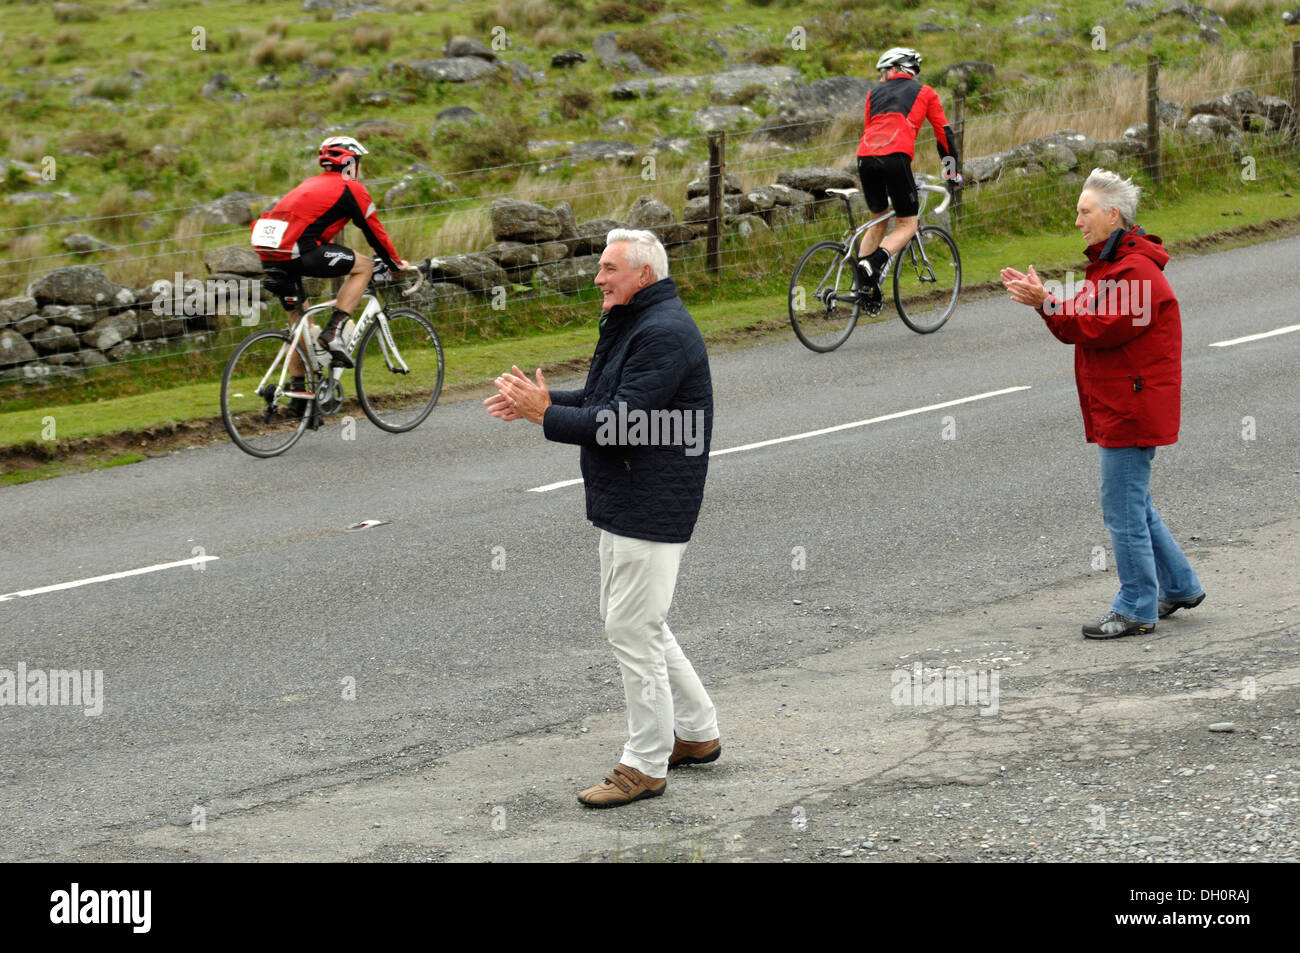 Supporters clapping and chearing on riders in the Dartmoor classic cyclosportive 2013 Stock Photo